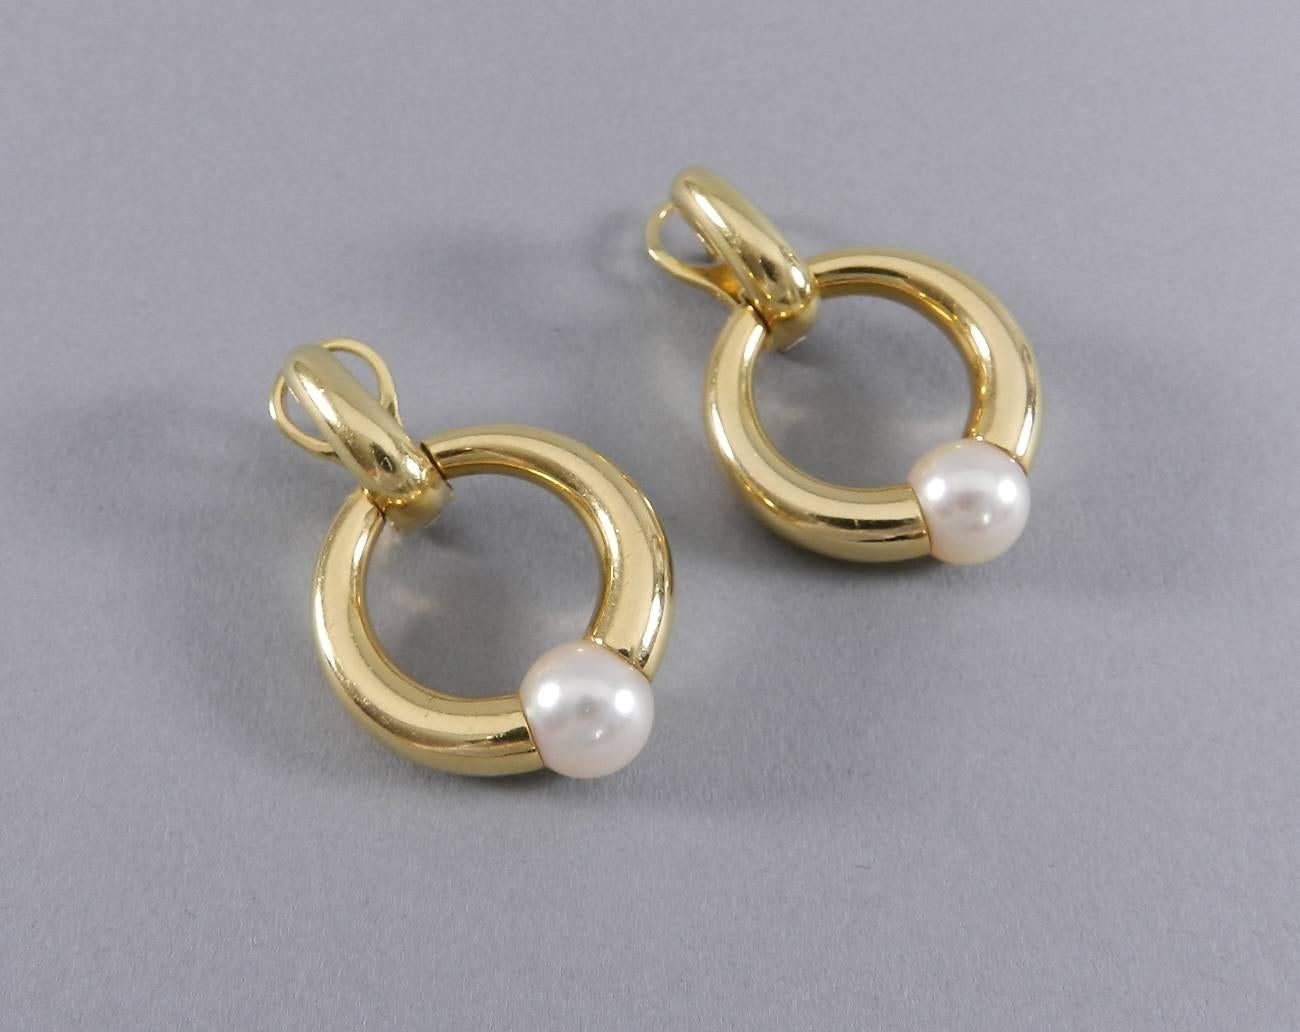 Cartier vintage 1994 earrings - 18k yellow gold and pearl. Excellent condition. 8mm Akoya pearls, 33 mm long and 22.5 mm wide. Hallmarked (c) Cartier 1994 E86335. Total weight 17.7 grams. 

We ship worldwide.